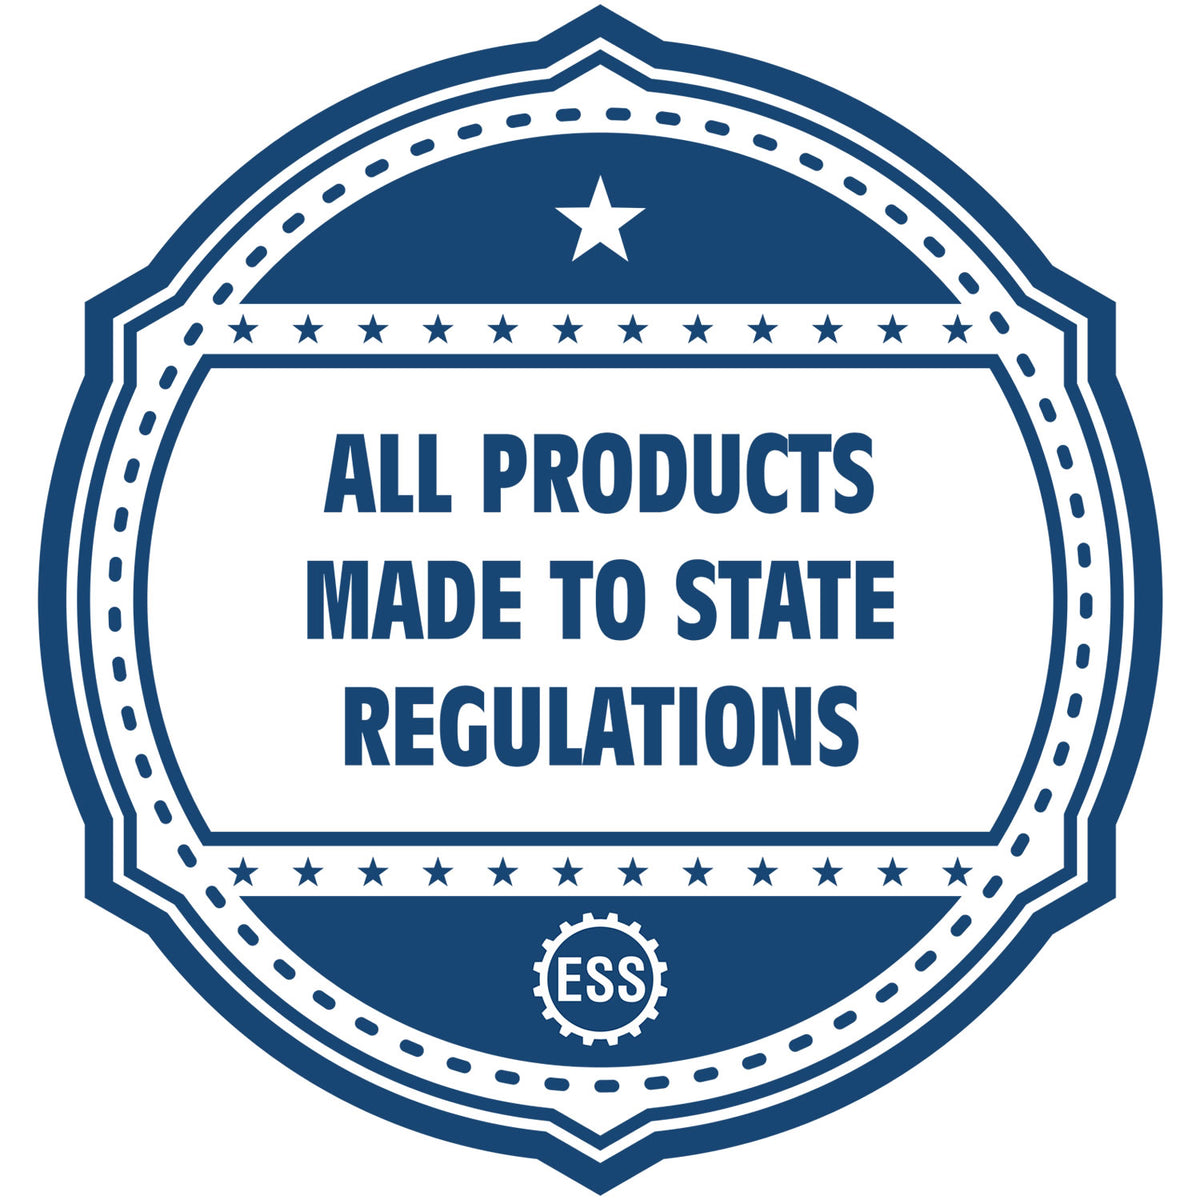 A blue icon or badge for the Gift Nevada Landscape Architect Seal showing that this product is made in compliance with state regulations.